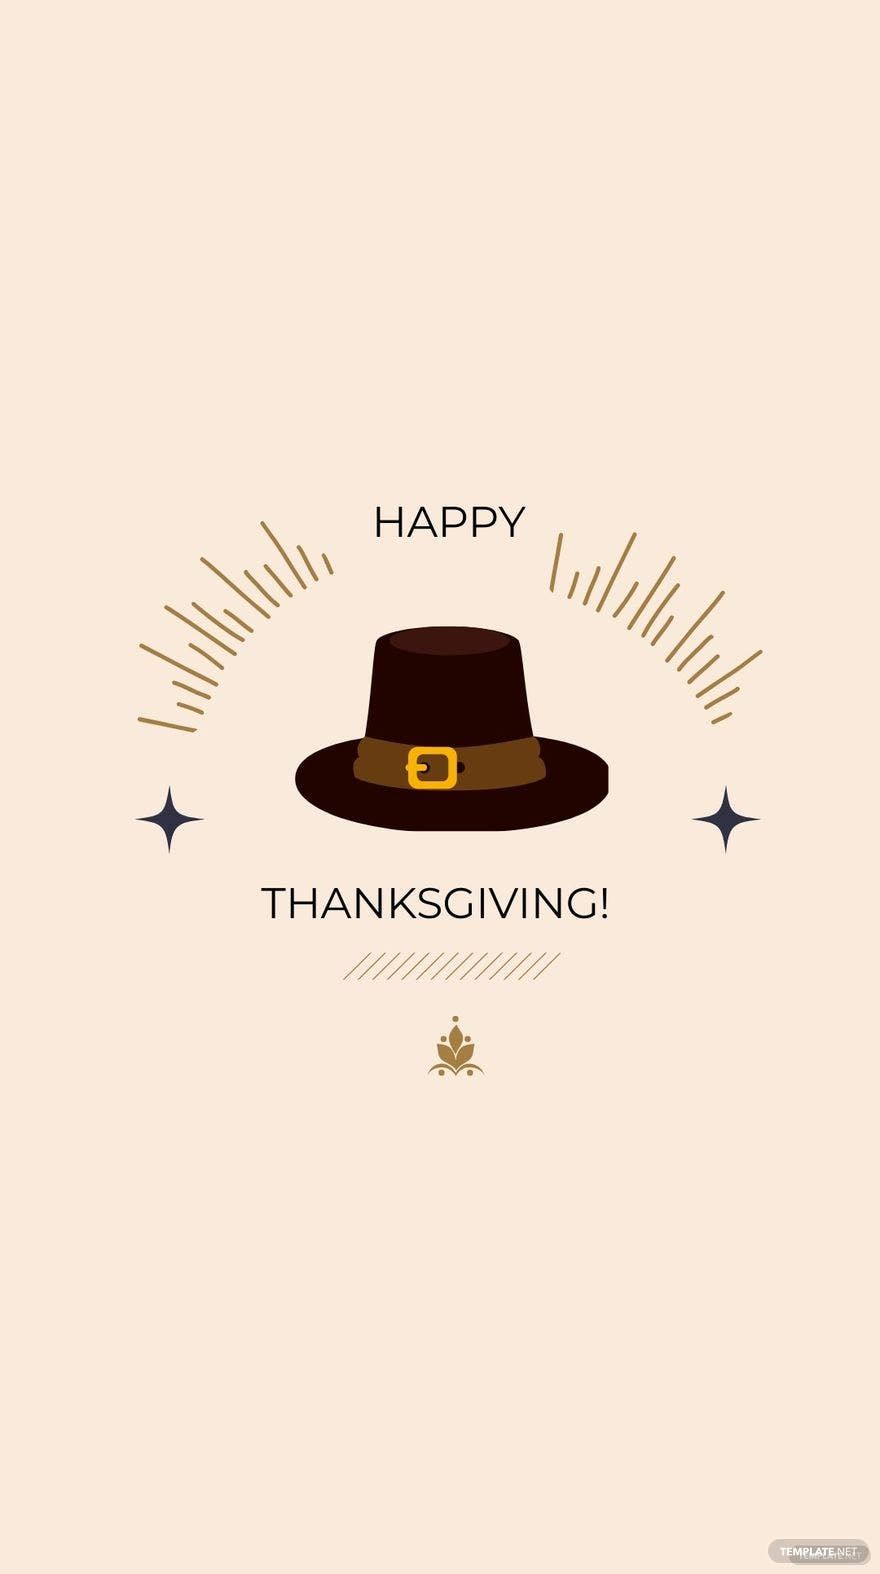 Free Thanksgiving Day iPhone Background in PDF, Illustrator, PSD, EPS, SVG, JPG, PNG